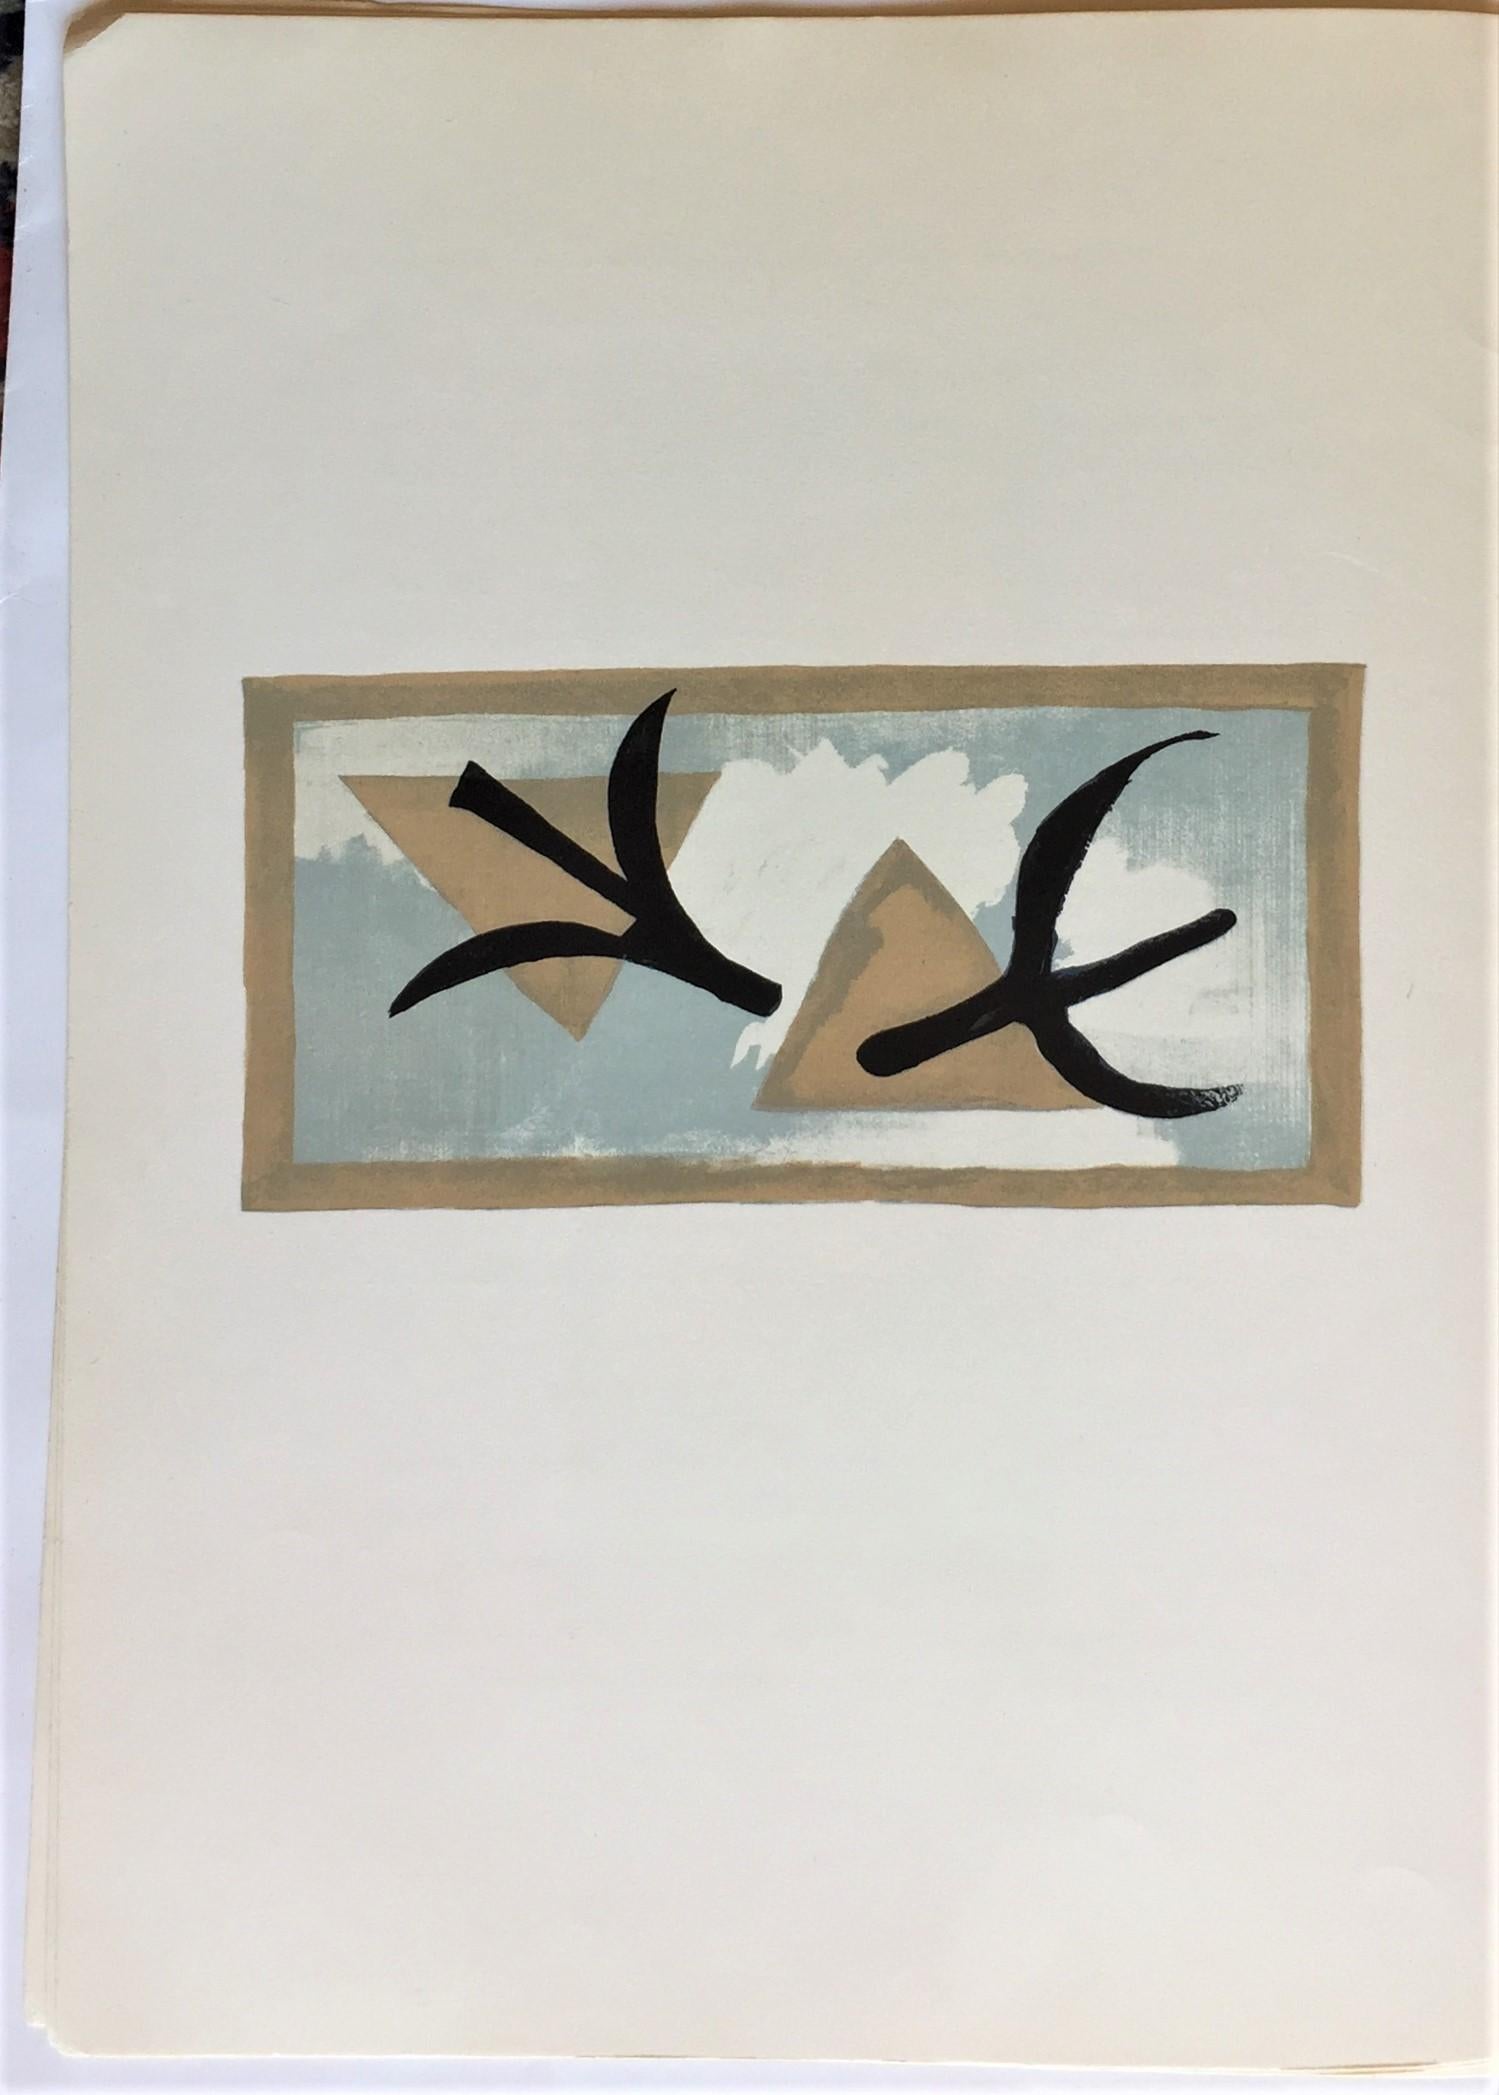 Les martinets (black swifts) - Gray Landscape Print by (after) Georges Braque